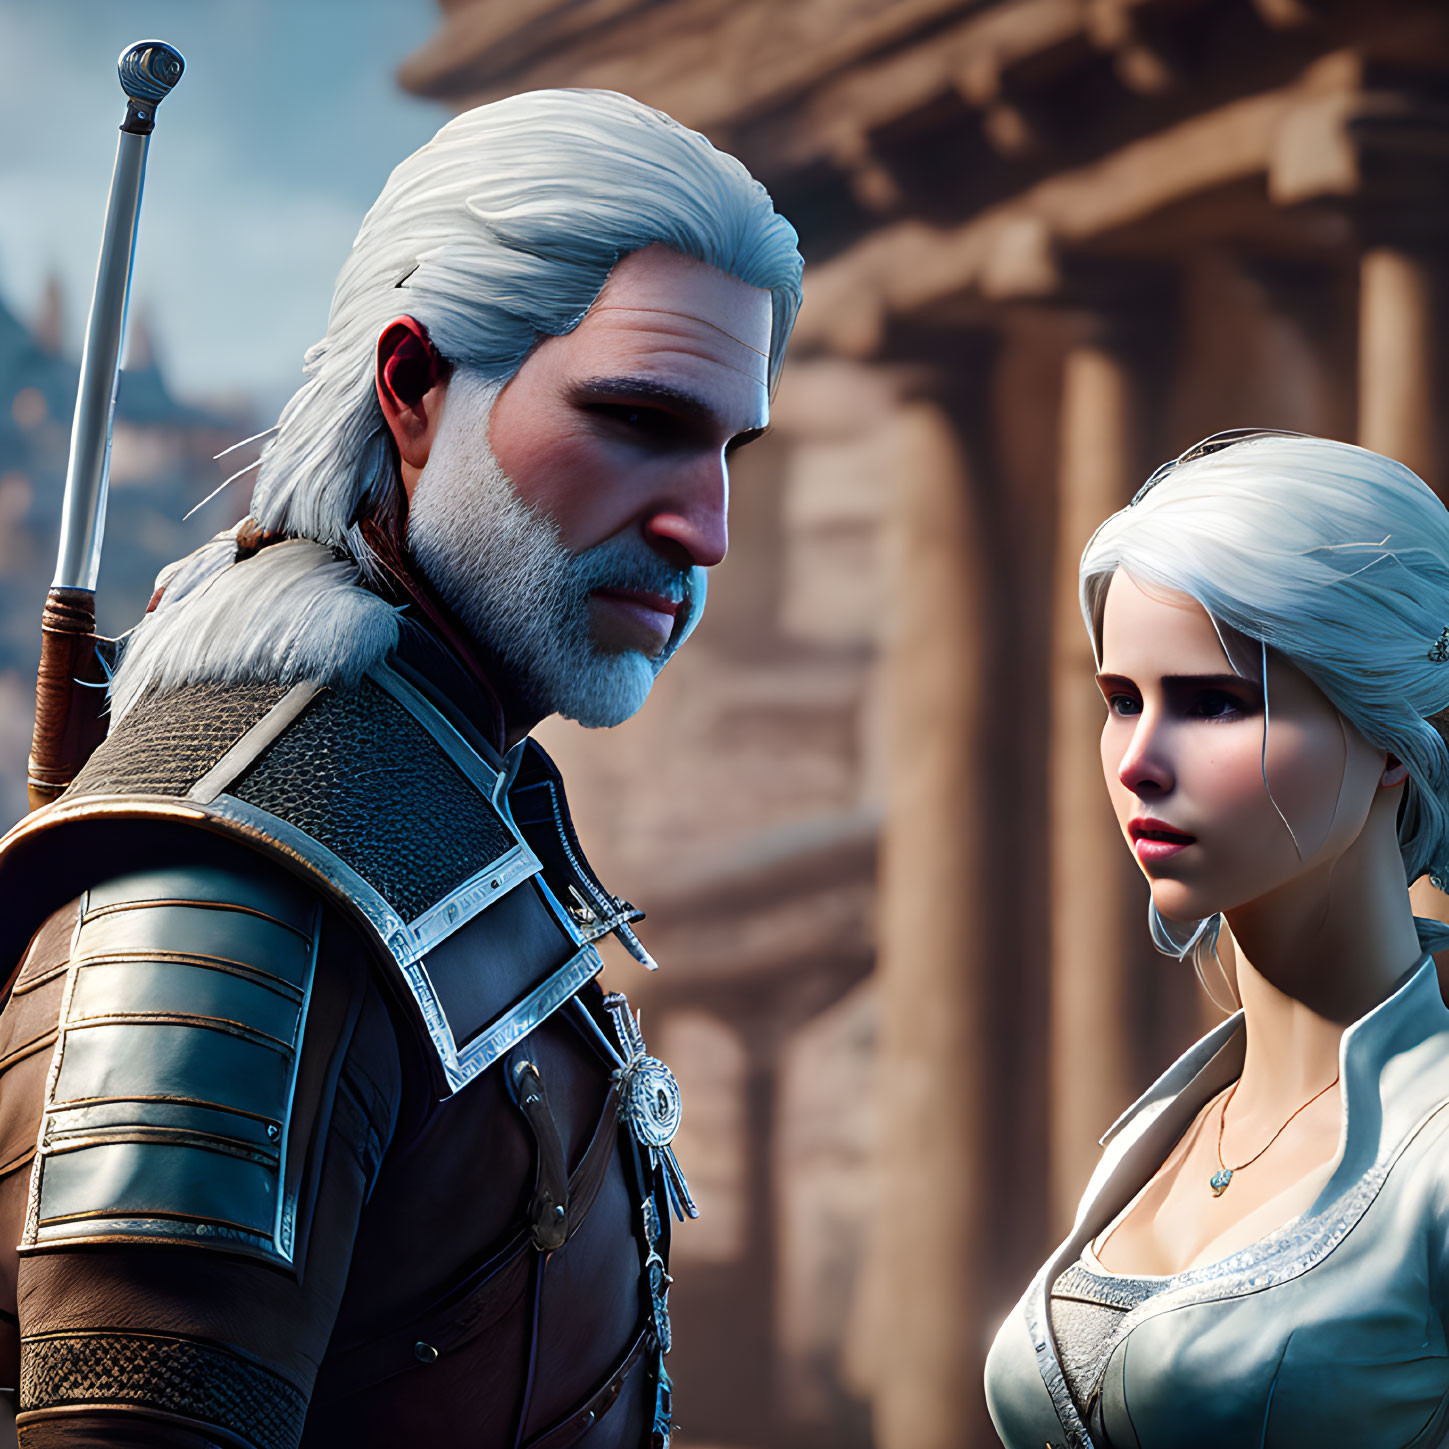 White-haired man and woman in medieval attire standing together.